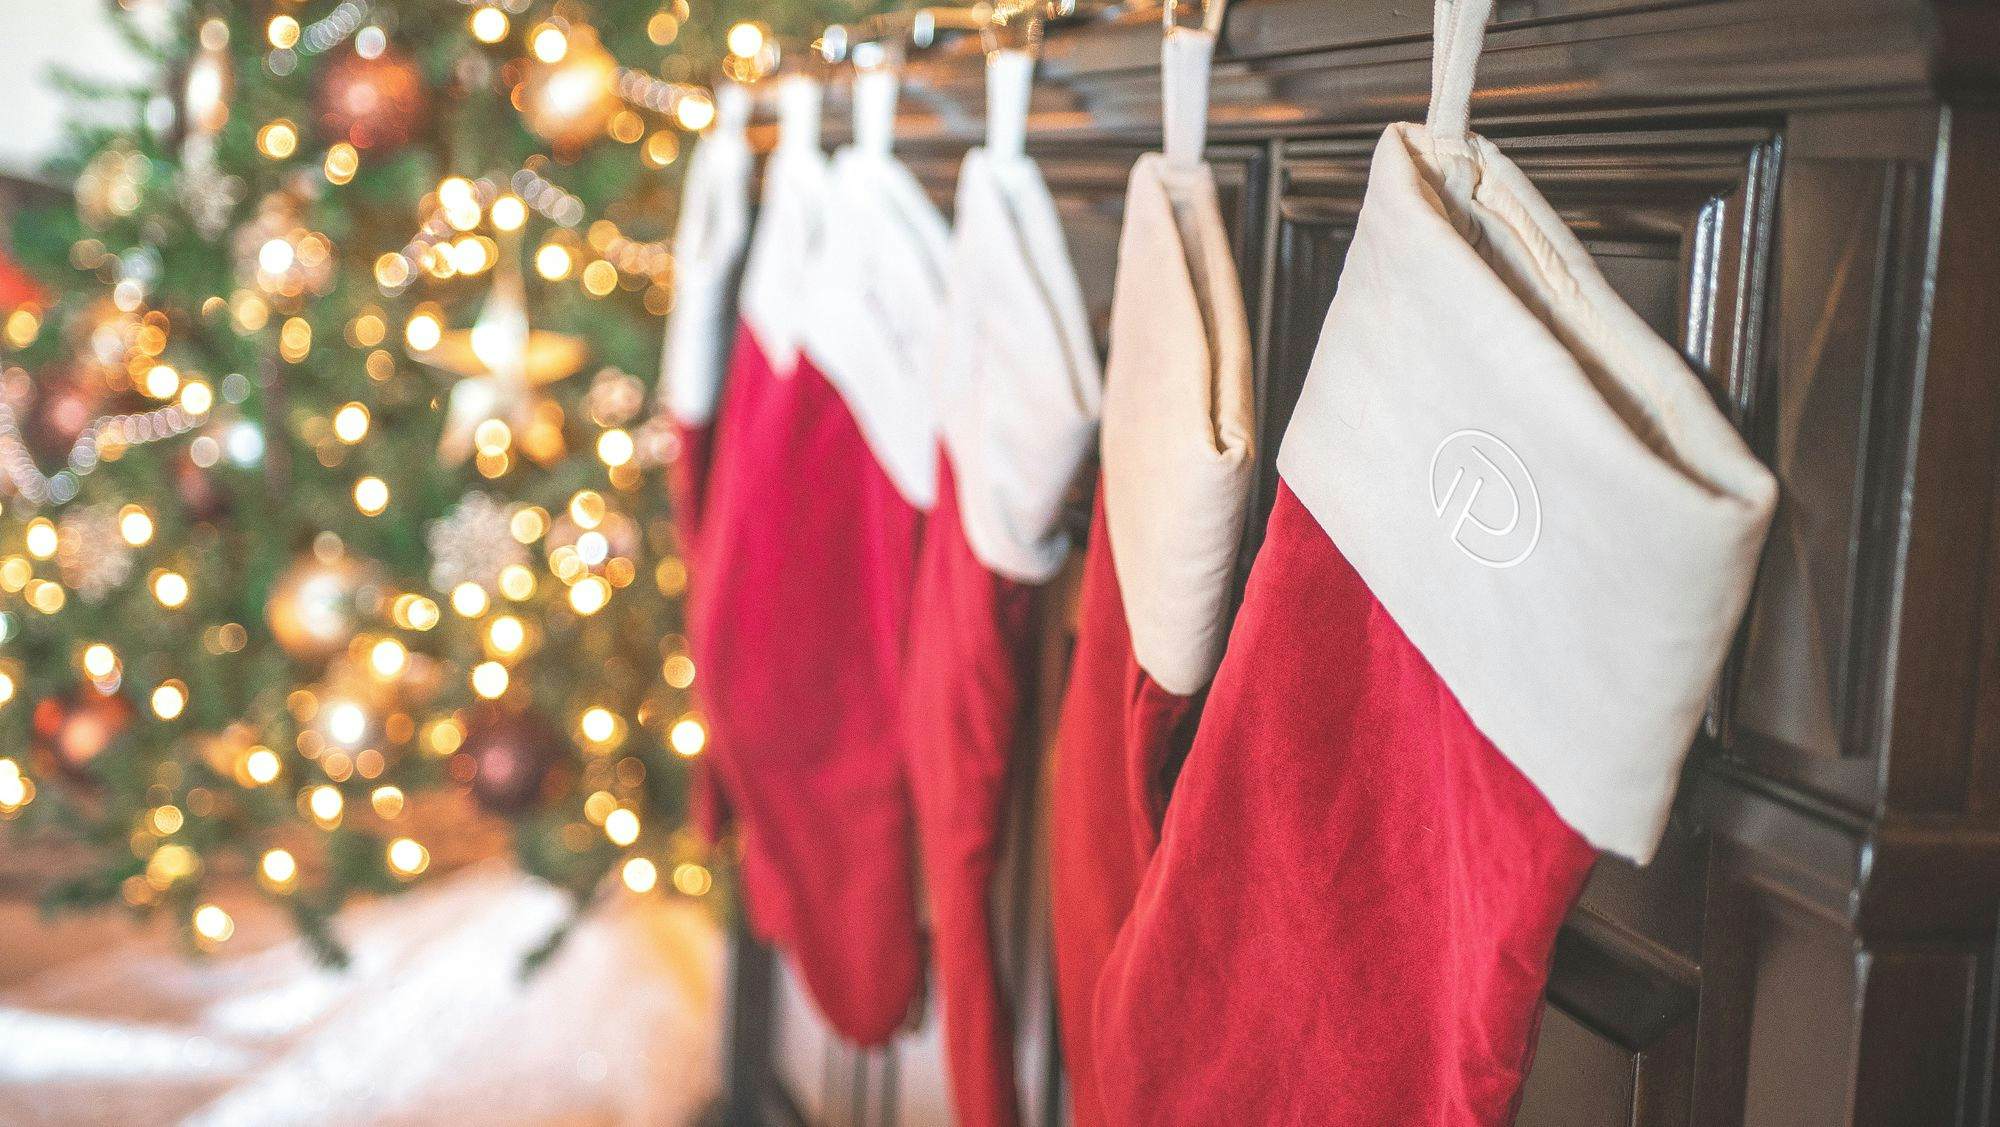 What our Portfolio Managers and Investment Analysts are putting under the tree this year